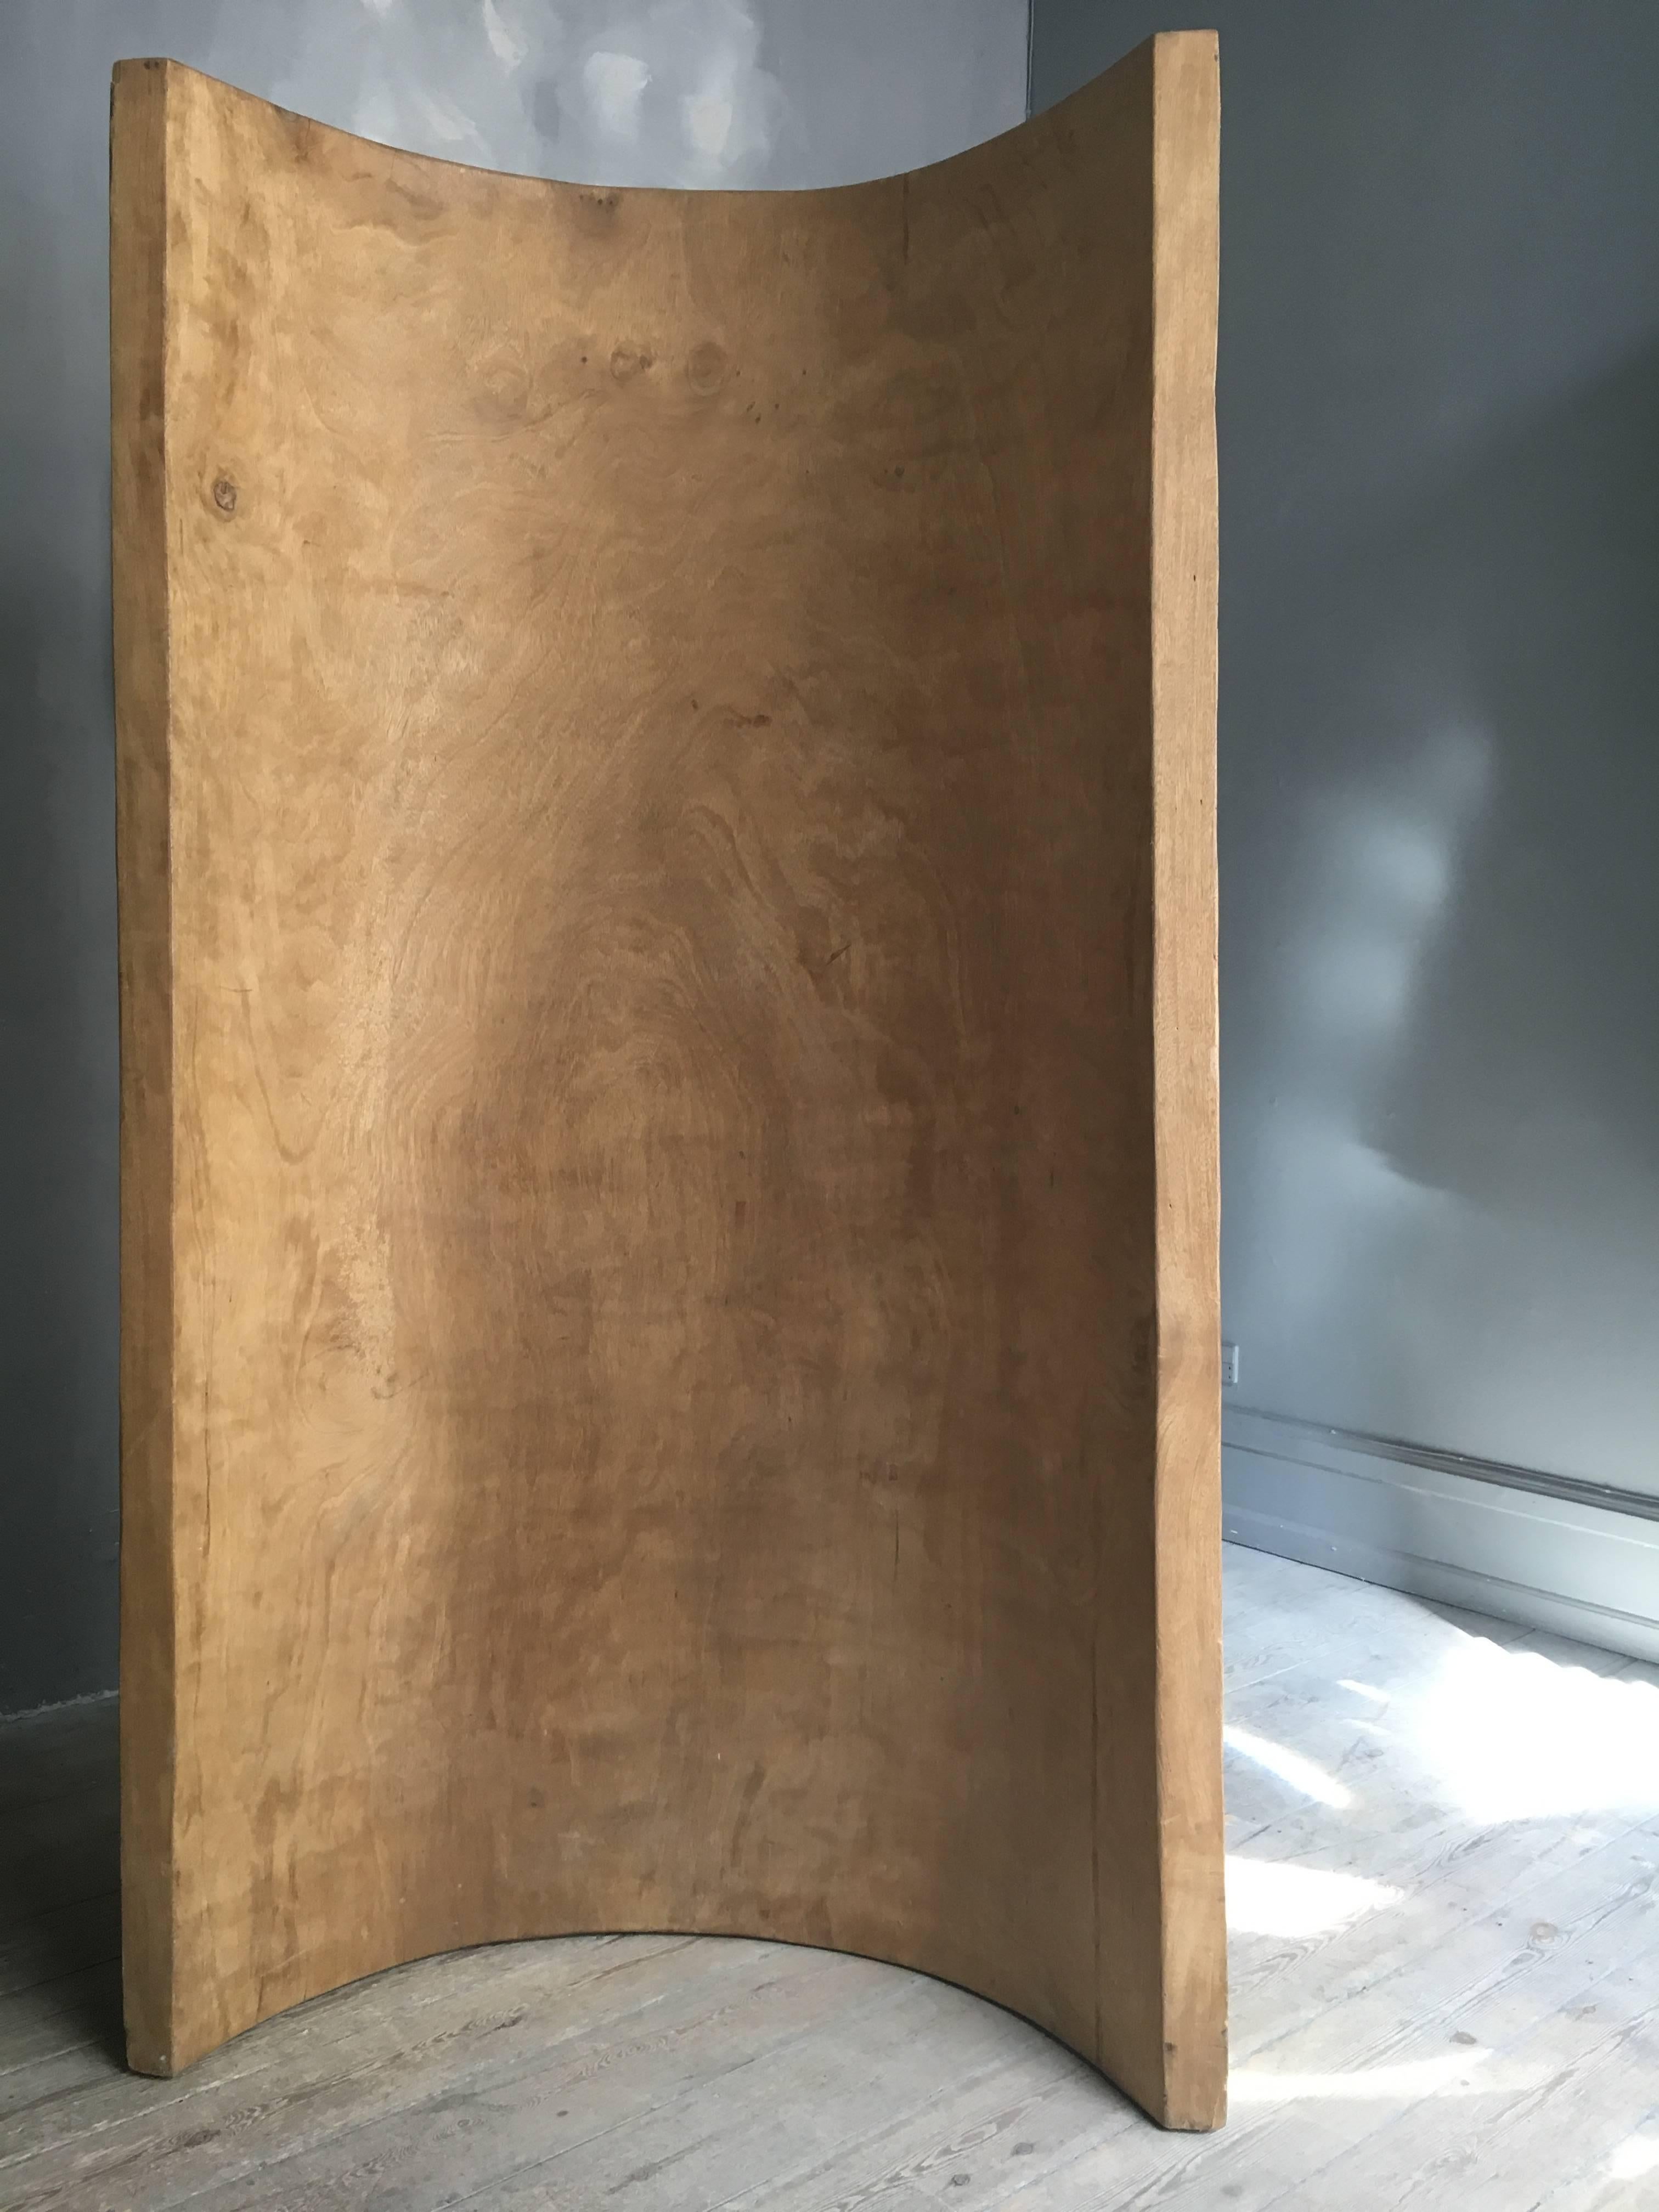 Very large and heavy wooden panel made out of one piece of wood from a tree trunk.
Please note: This item is located in our New York City Studio and will be shipped from there.